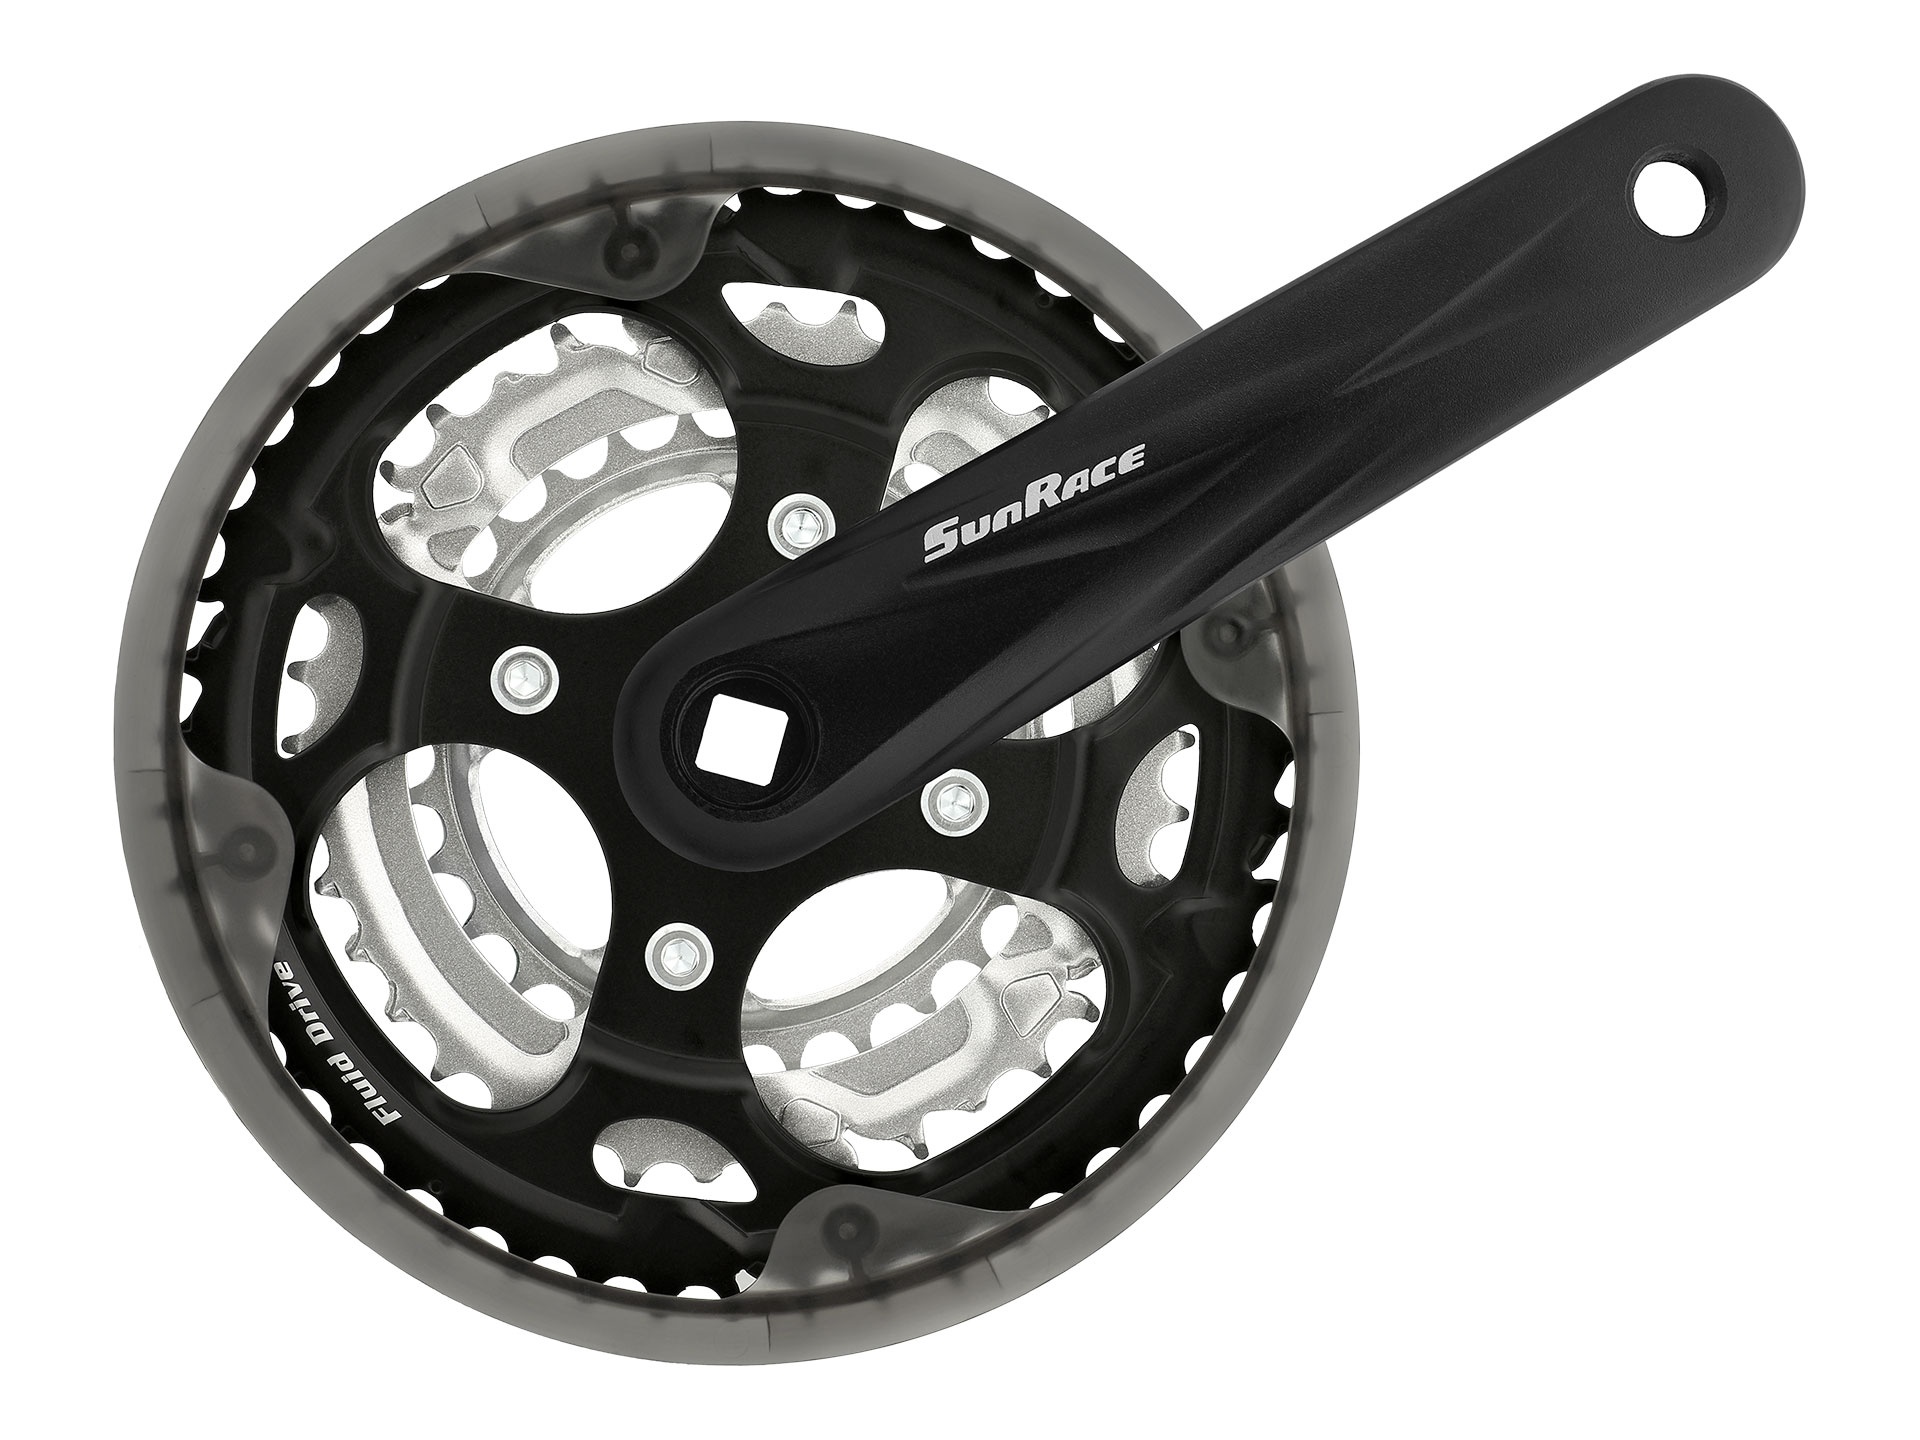 Sunrace FCM300 Chainset: 7/8 Speed 48/38/28T 170mm